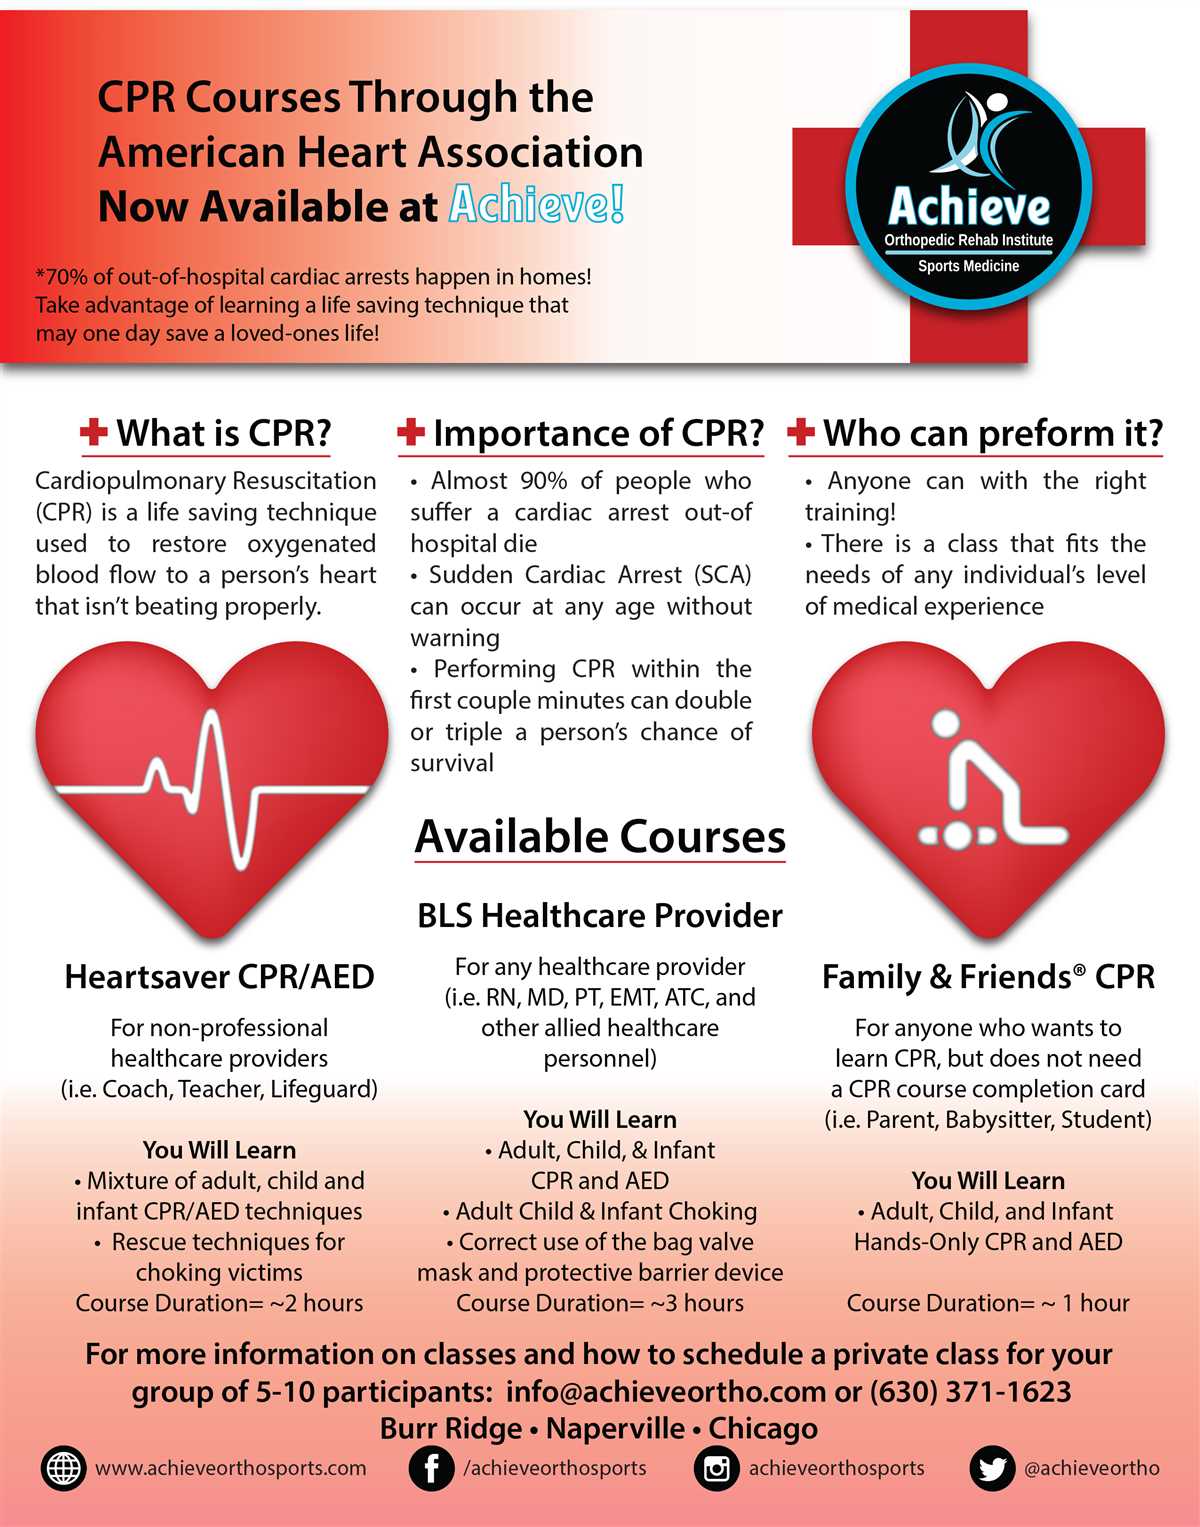 What is the format of the American Heart Association CPR test?